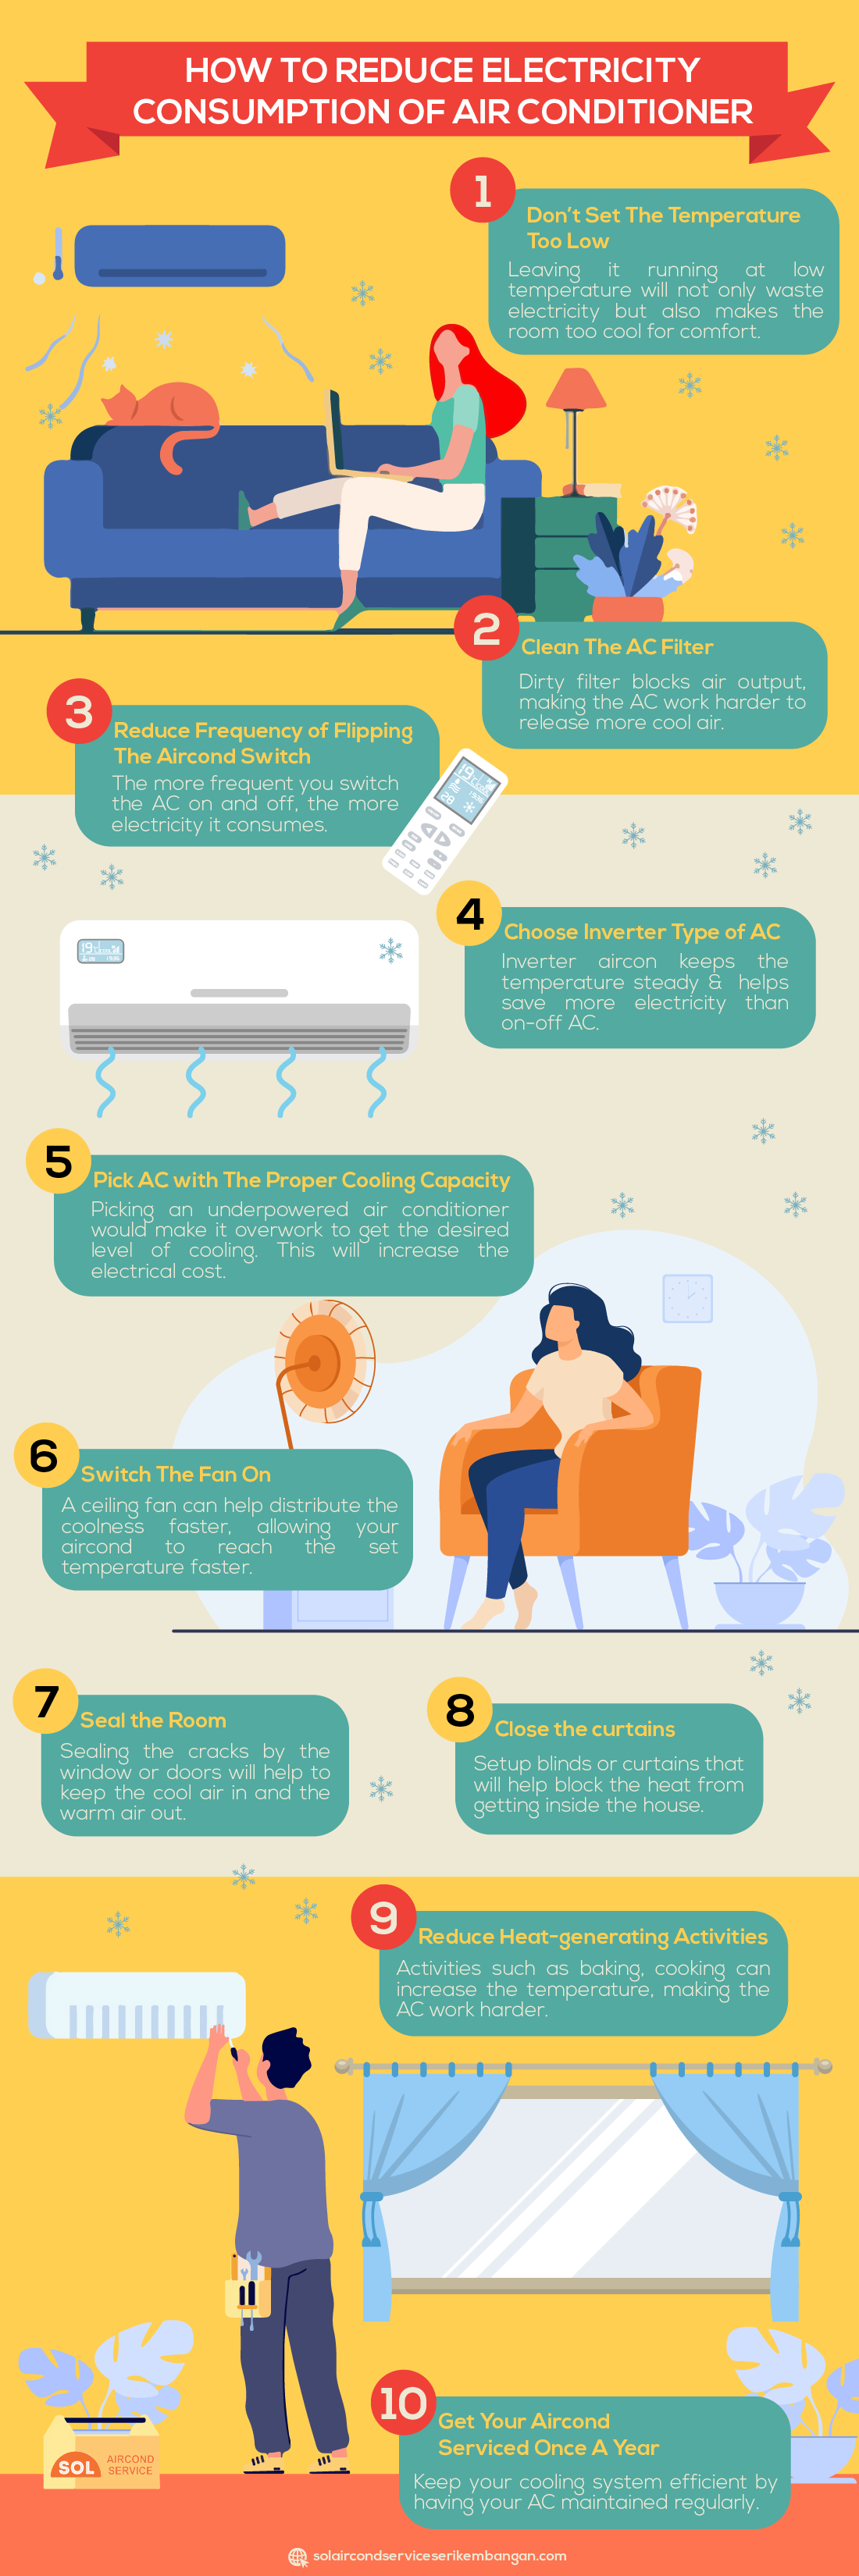 how to reduce electricity consumption of air conditioner infographic